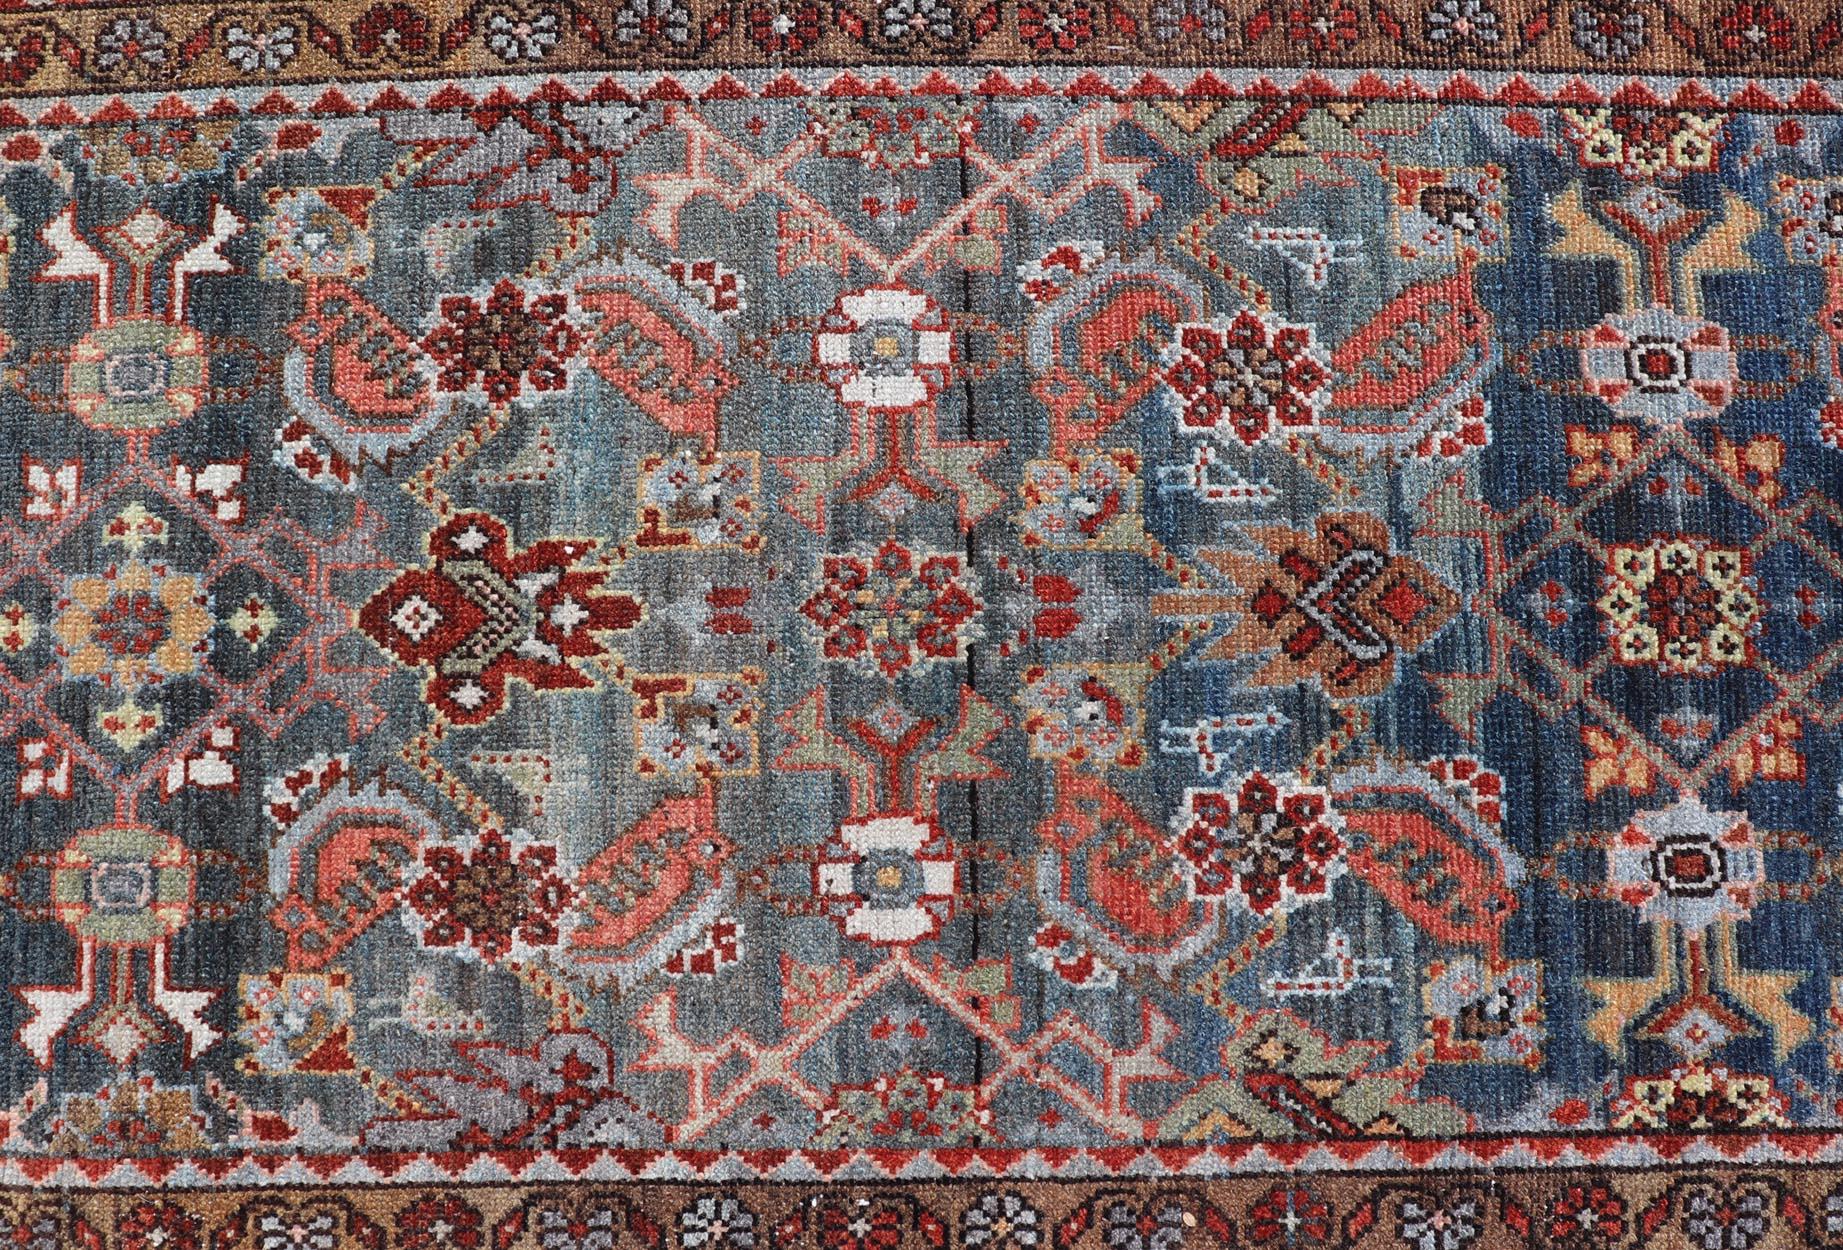 N.W. Persian Antique Runner with Geometric Florals Set on a Blue Field For Sale 5